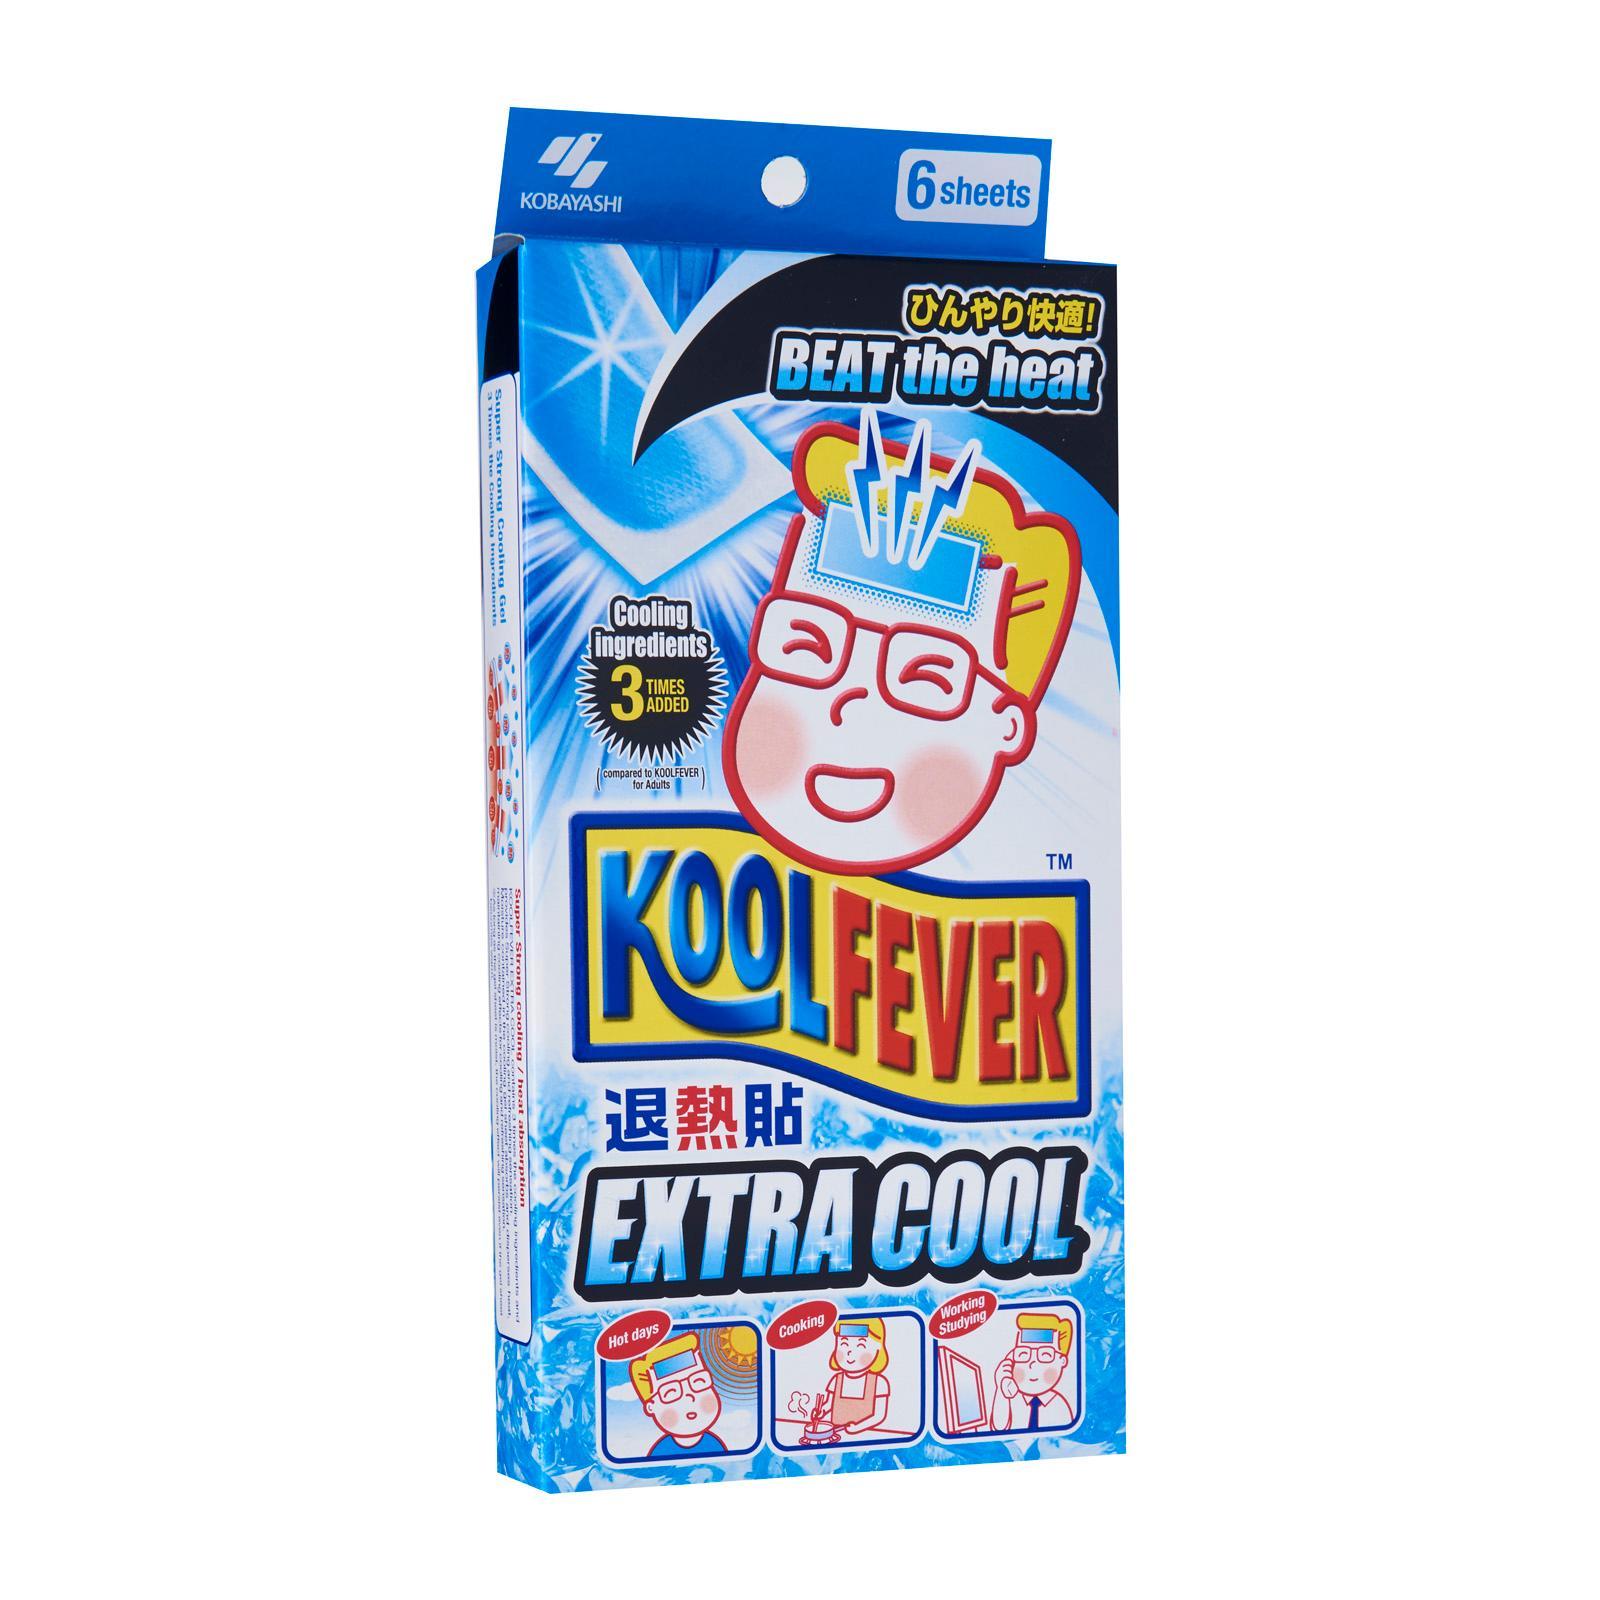 Fever cool